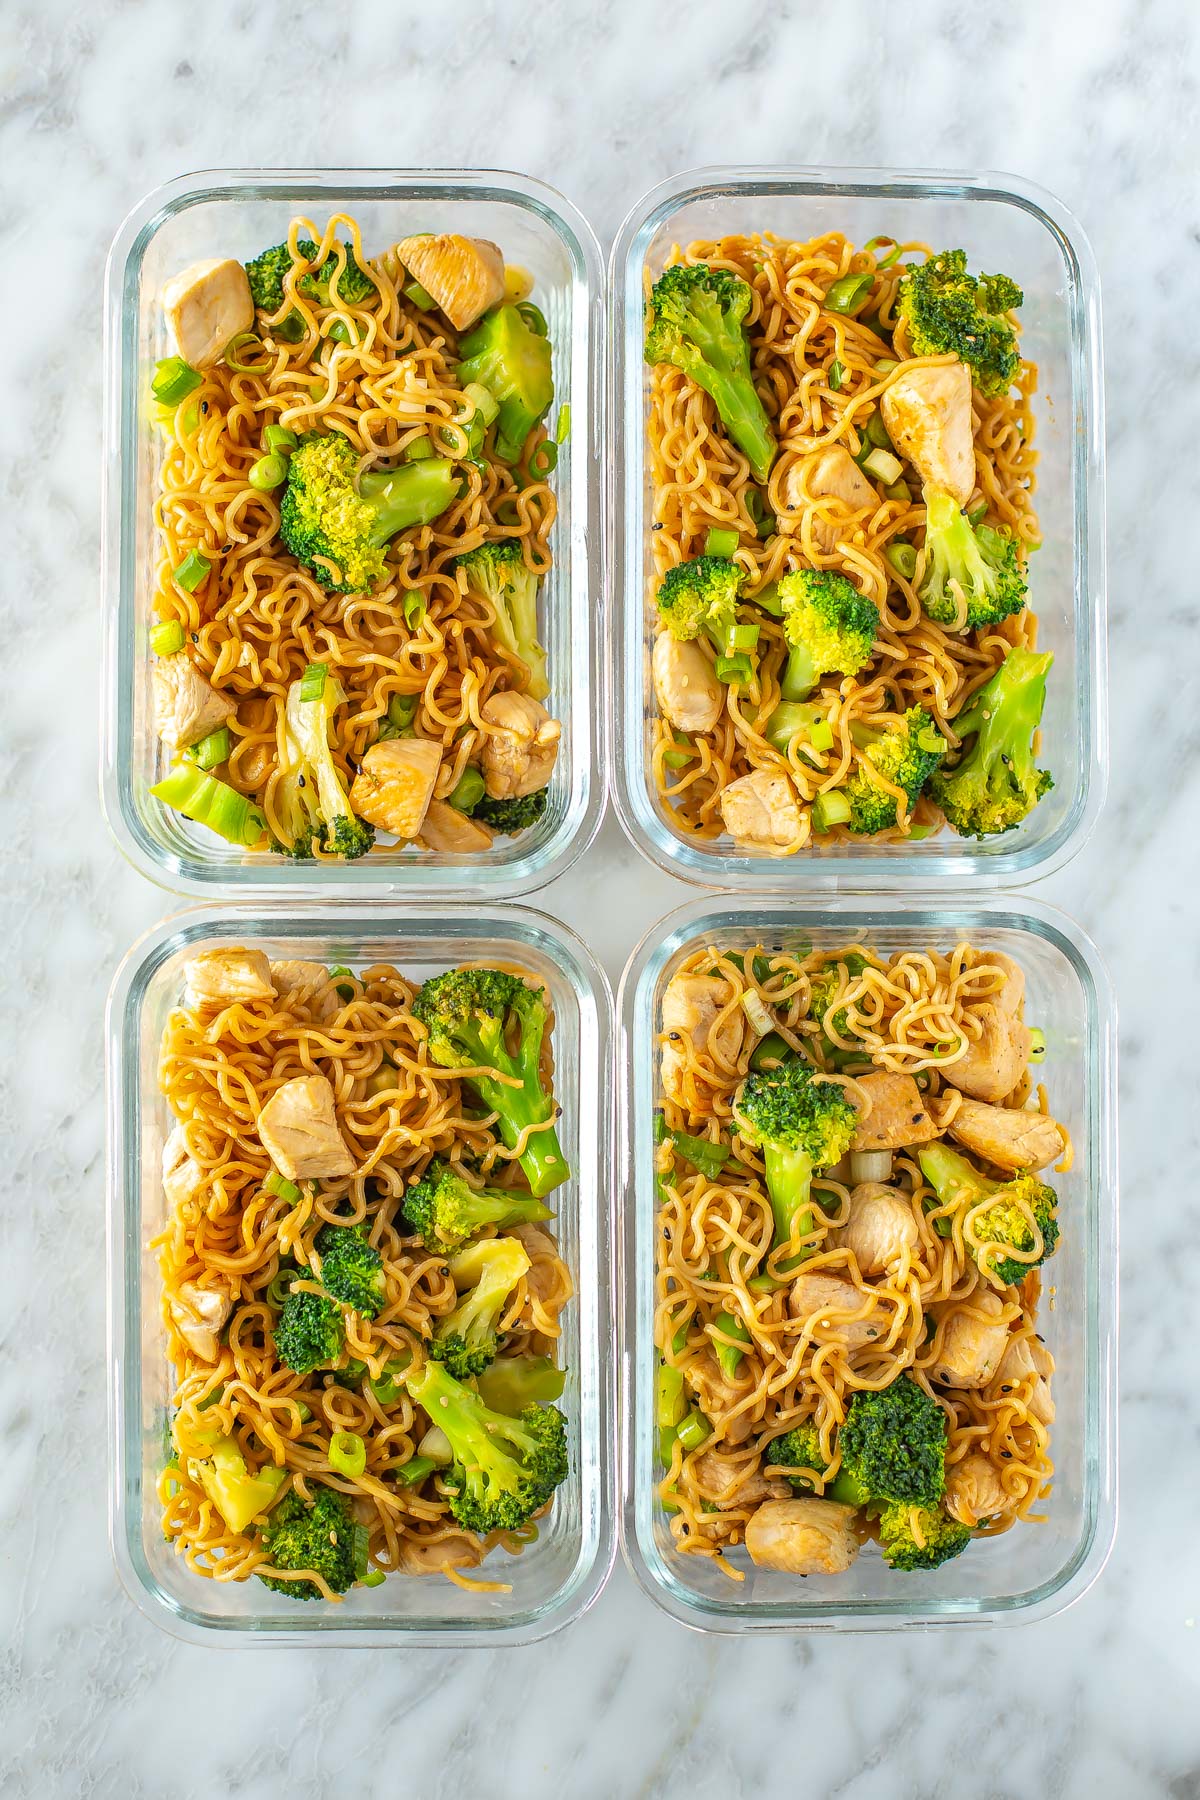 Four meal prep containers, each with a serving of chicken ramen stir fry inside.